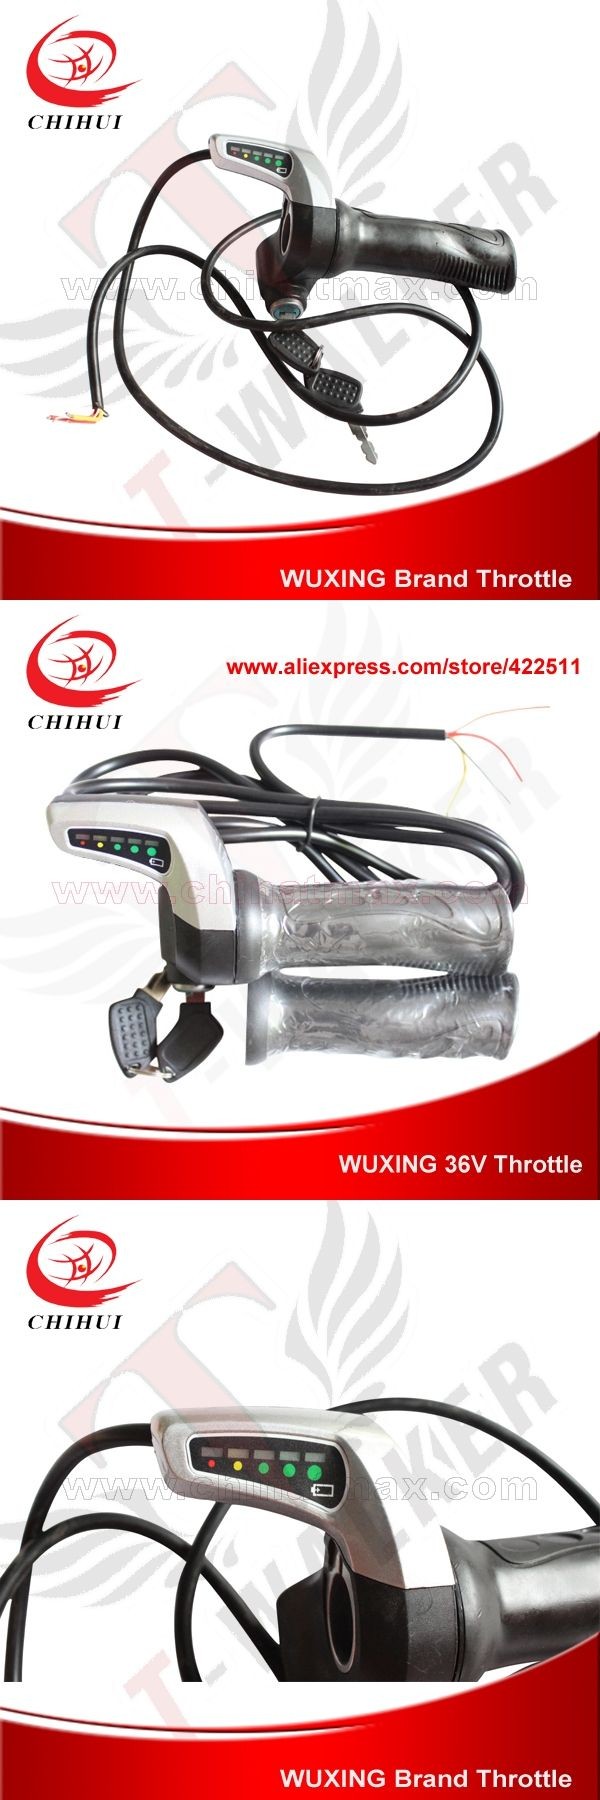 WUXING 36V Electric Bike Throttle Grip w Ignition Key & LED Indicator Electric Scooter Handle